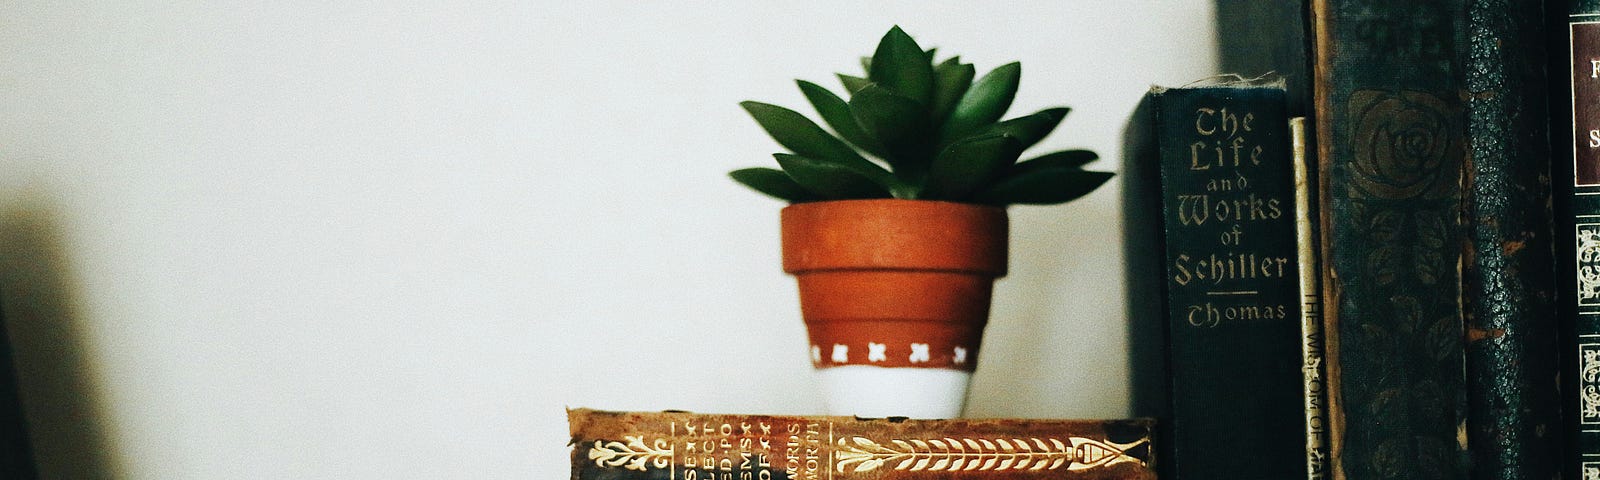 Picture of books on a shelf with a small potted plant.